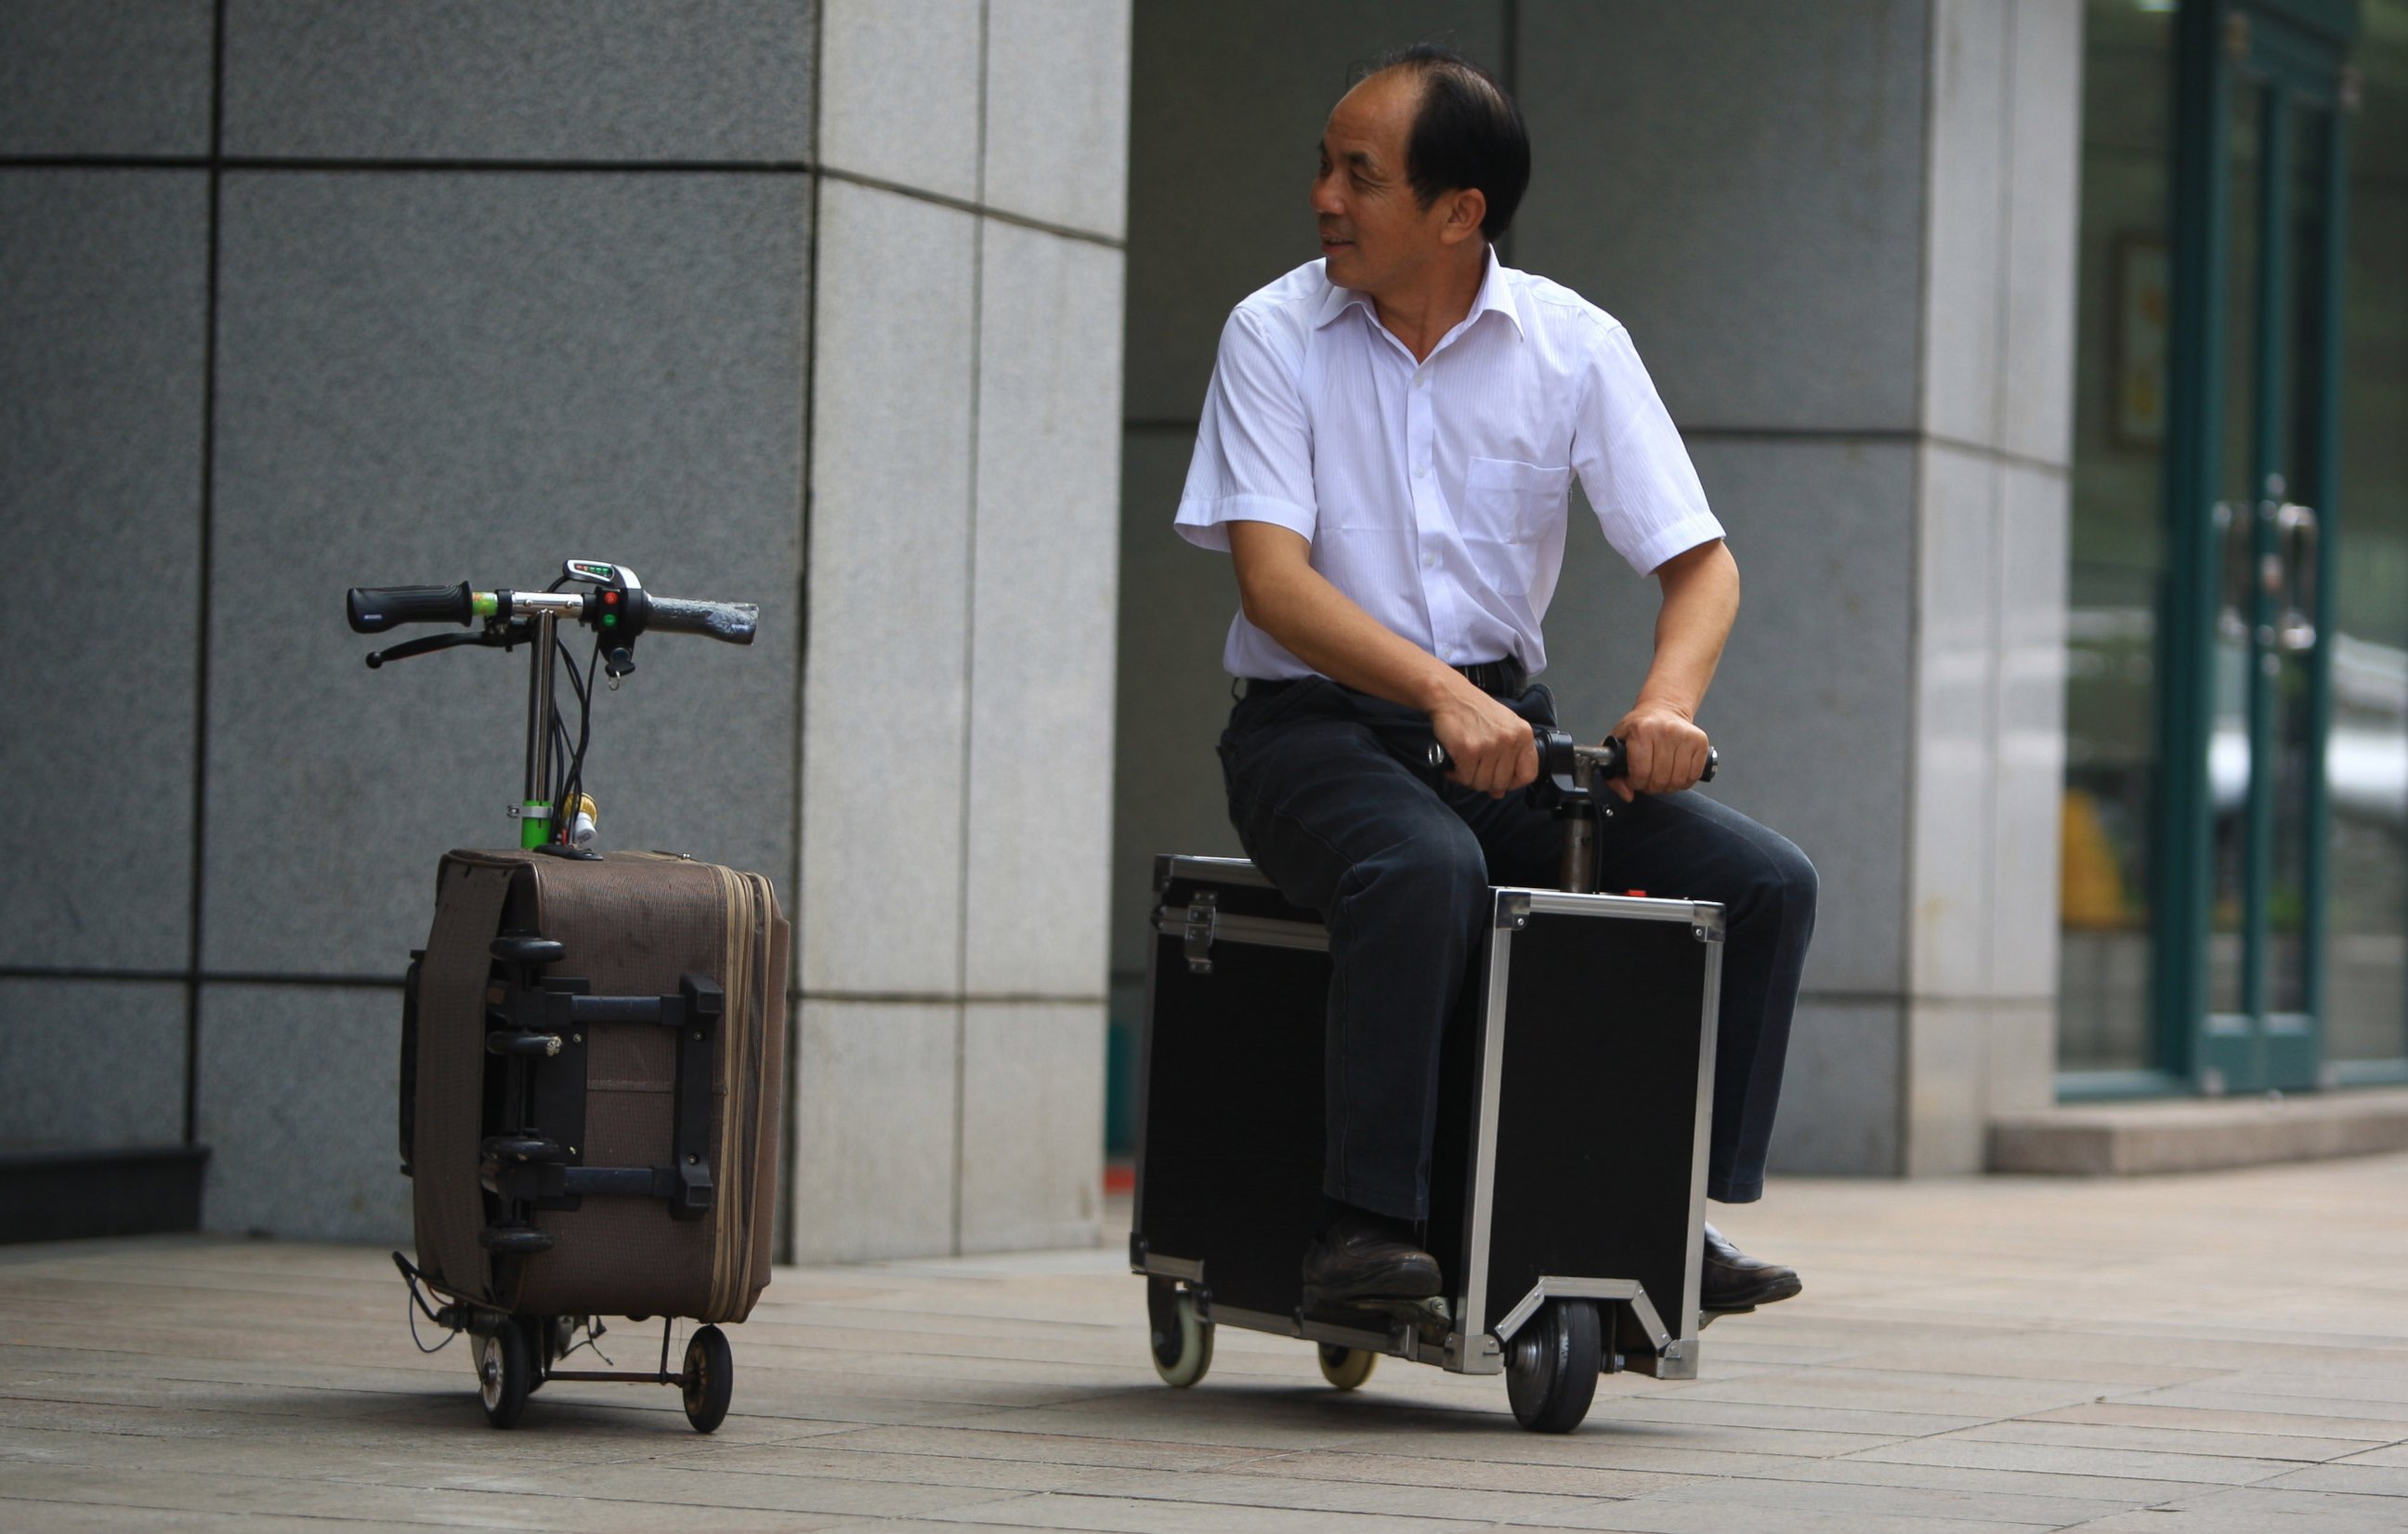 PHOTO: Chinese farmer He Liangcai rides a motorized scooter suitcase that he invented on the street in Changsha, central China's Hunan province, May 28, 2014. 